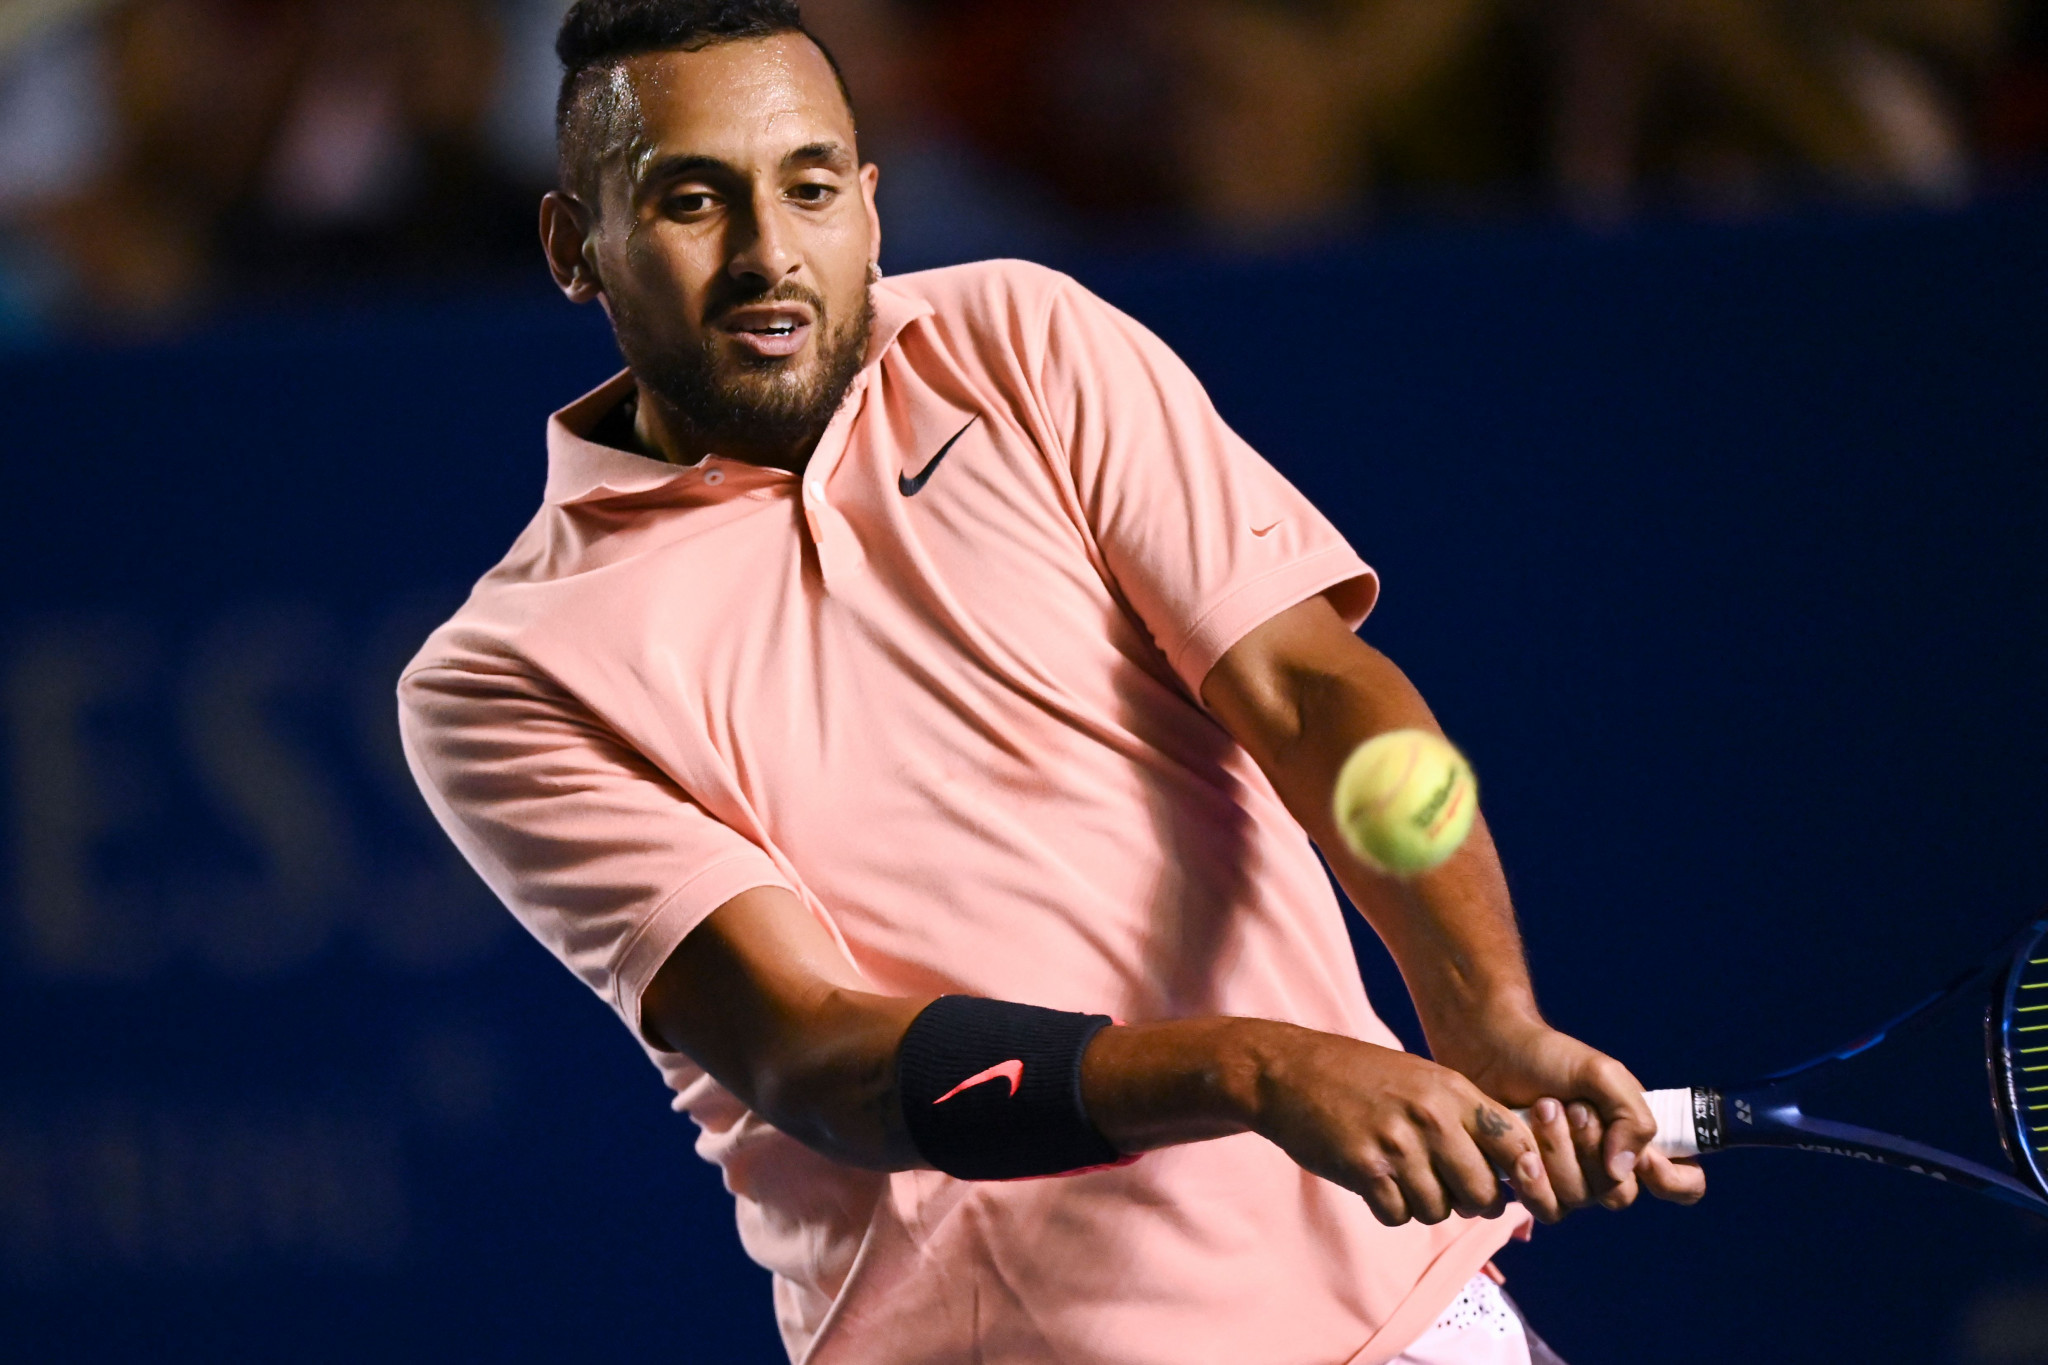 Kyrgios and Khachanov feud following Wilander comments at French Open